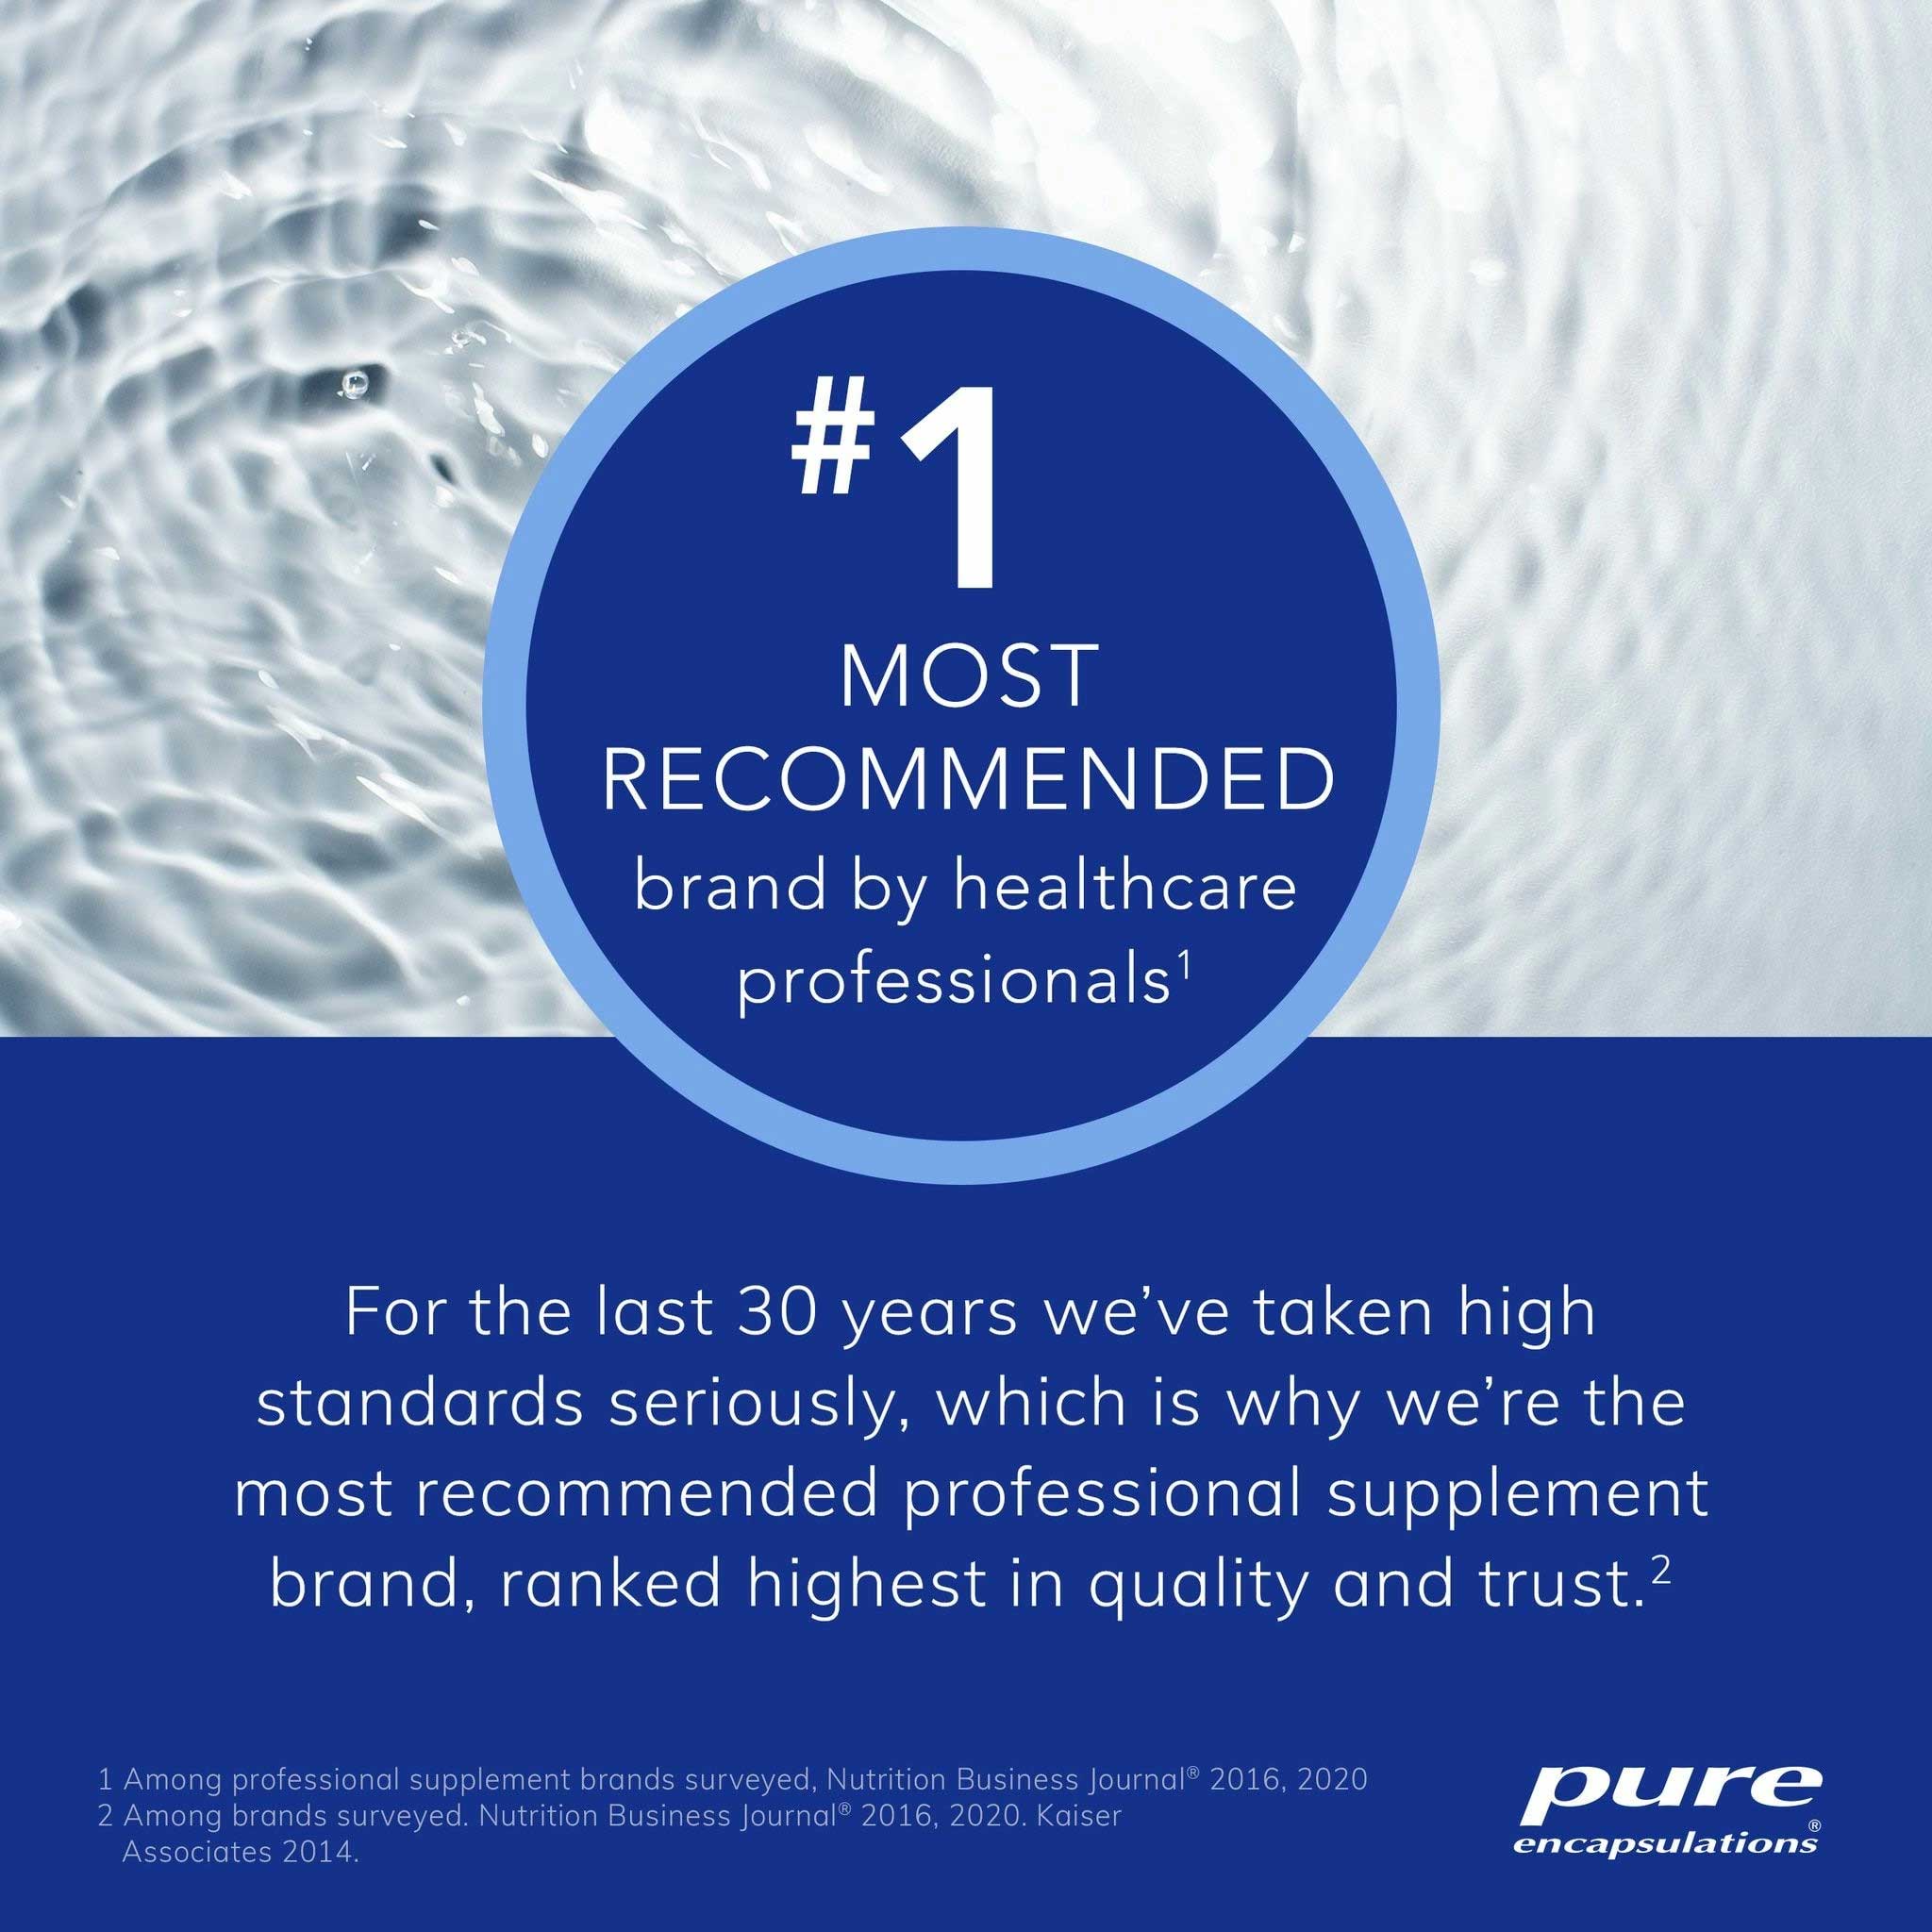 Pure Encapsulations ProbioMood (capsules) Most Recommended Brand